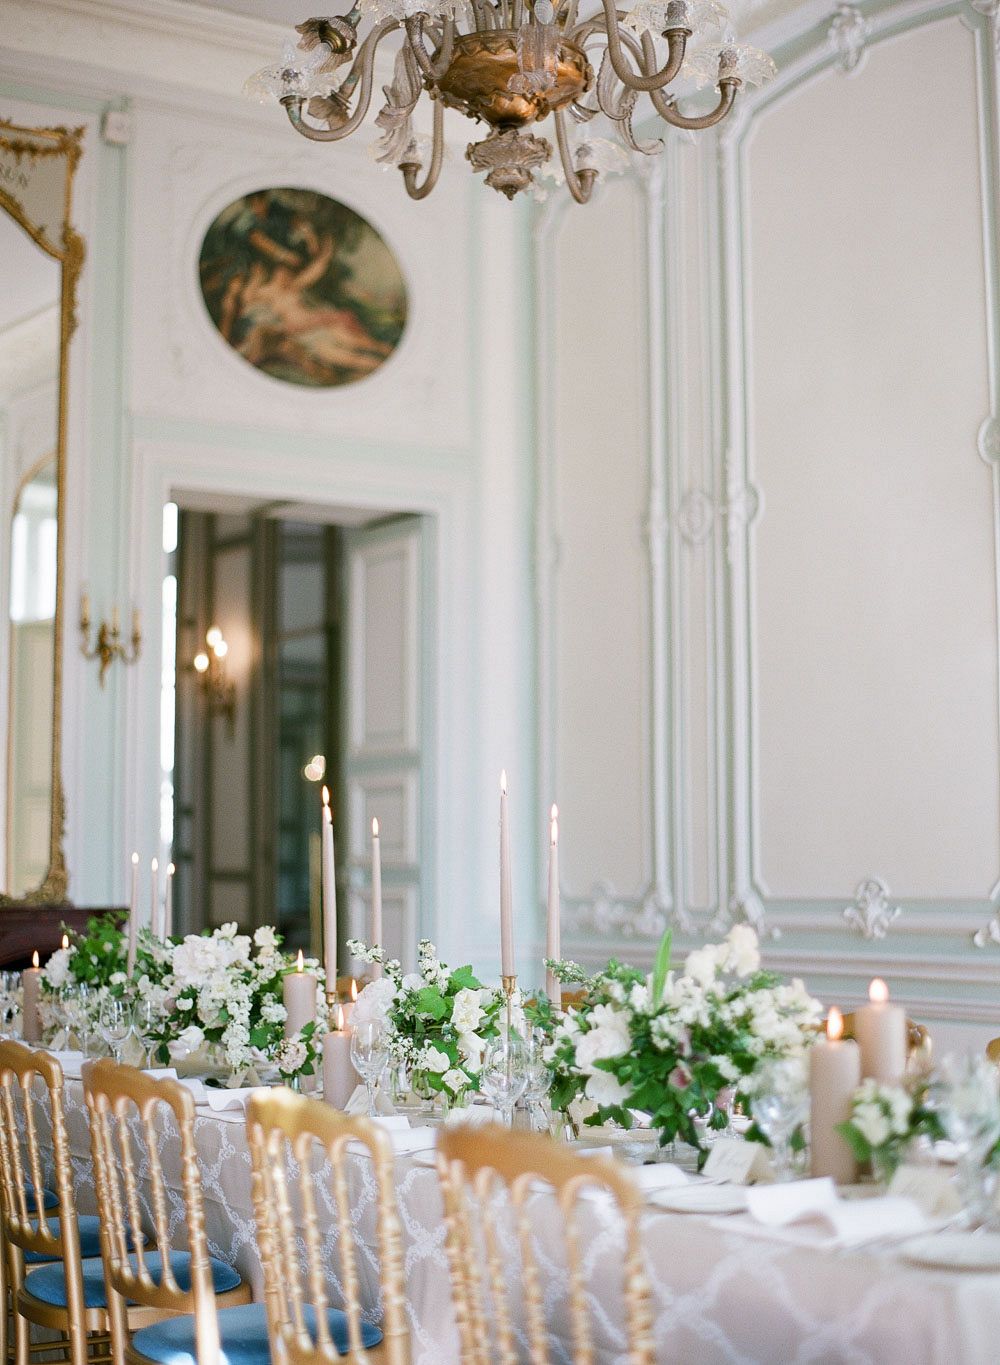 Setting the Table: Elements for a Glamorous Tablescape